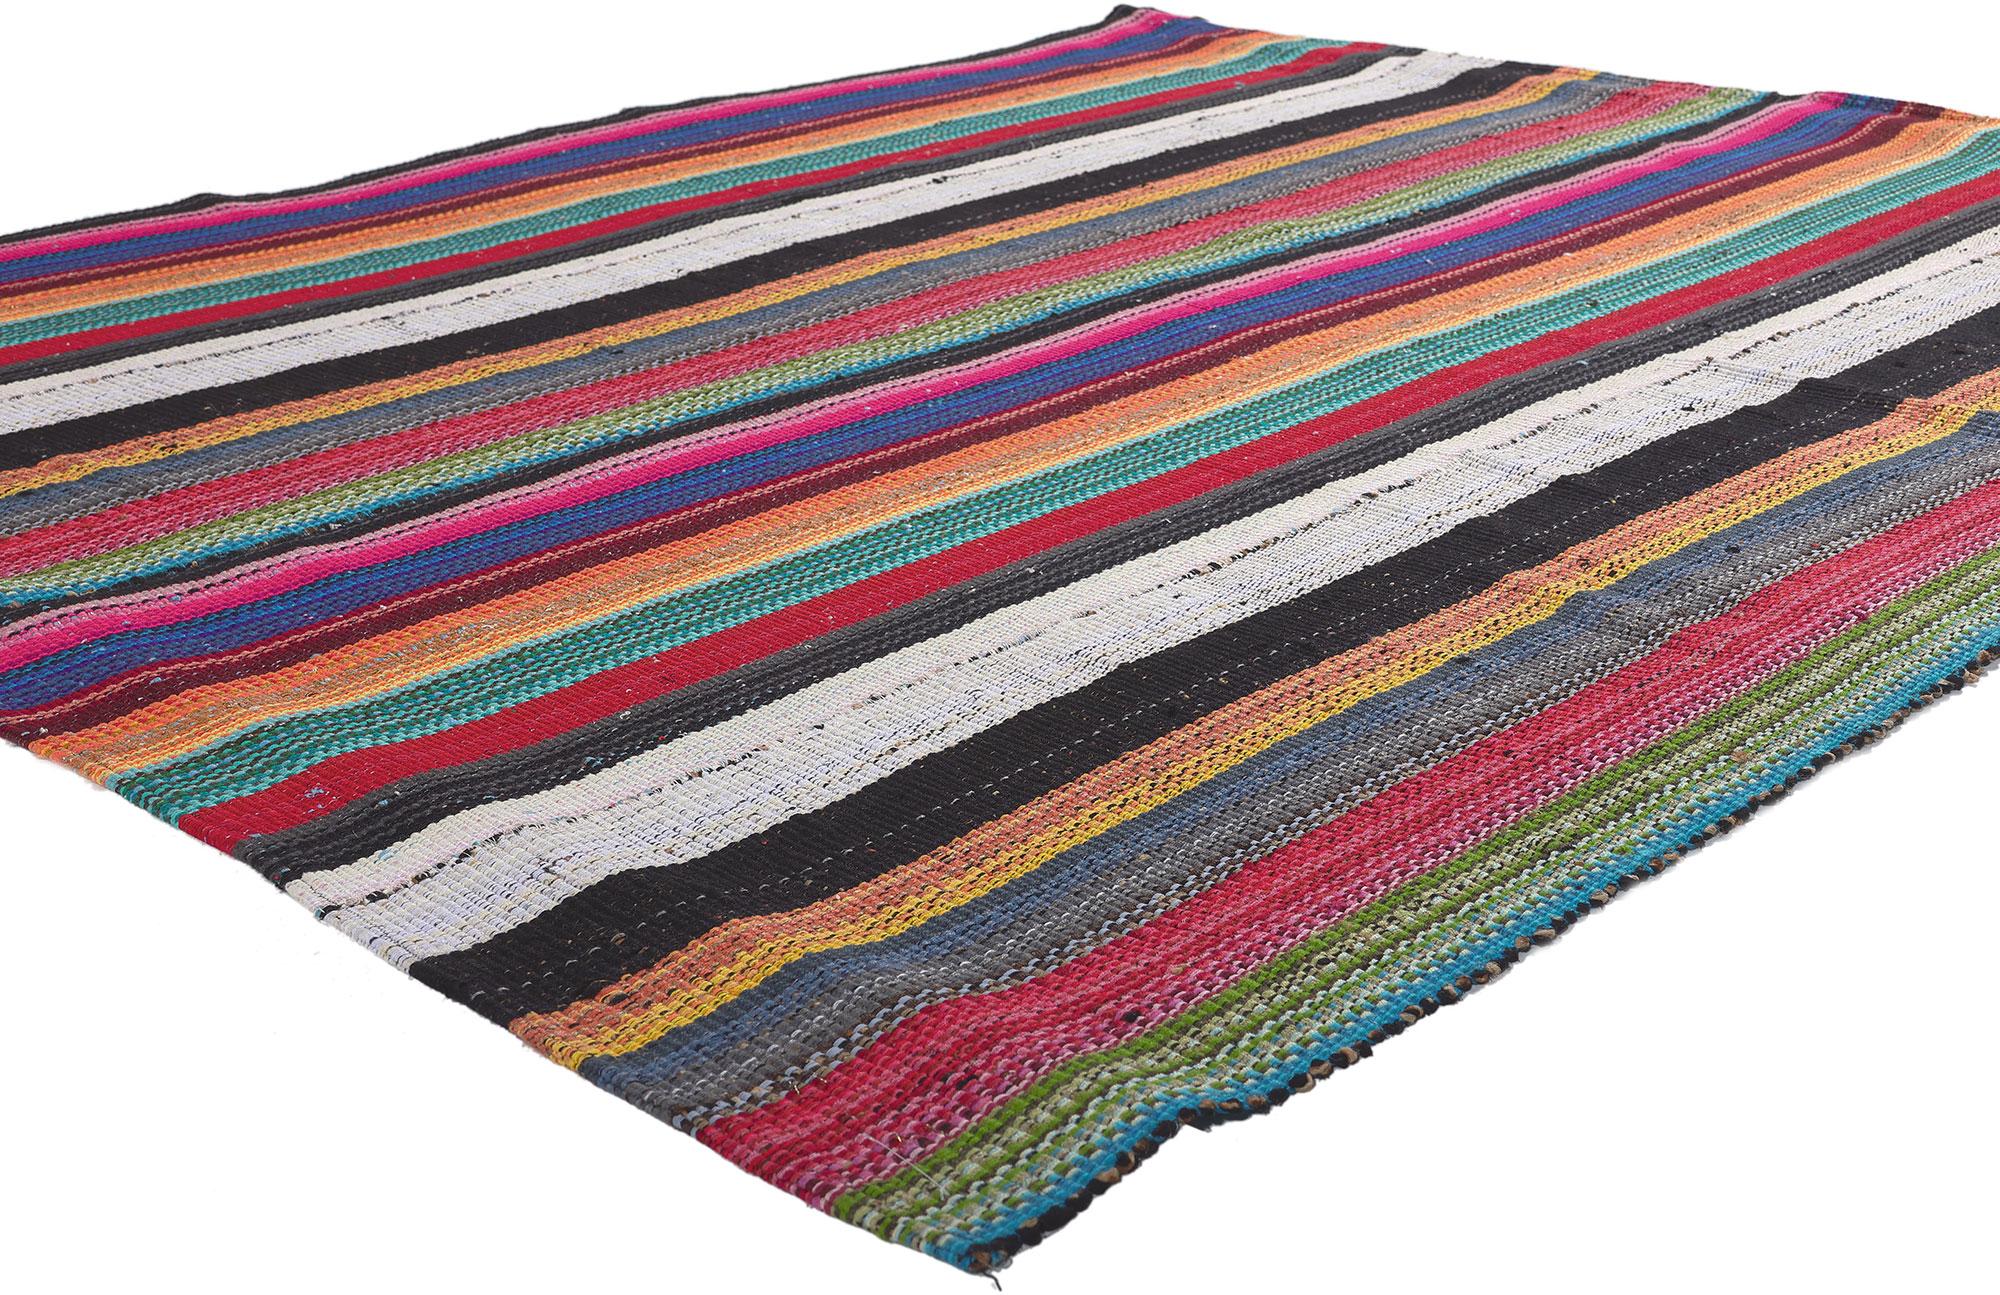 60678 Vintage Turkish Rainbow Stripe Kilim Rug, 05'08 x 07'01.
Bright, bold, vintage and modern, this handwoven rainbow stripe kilim rug has it all. The eye-catching striped pattern and vibrant colorway woven into this piece work together creating a